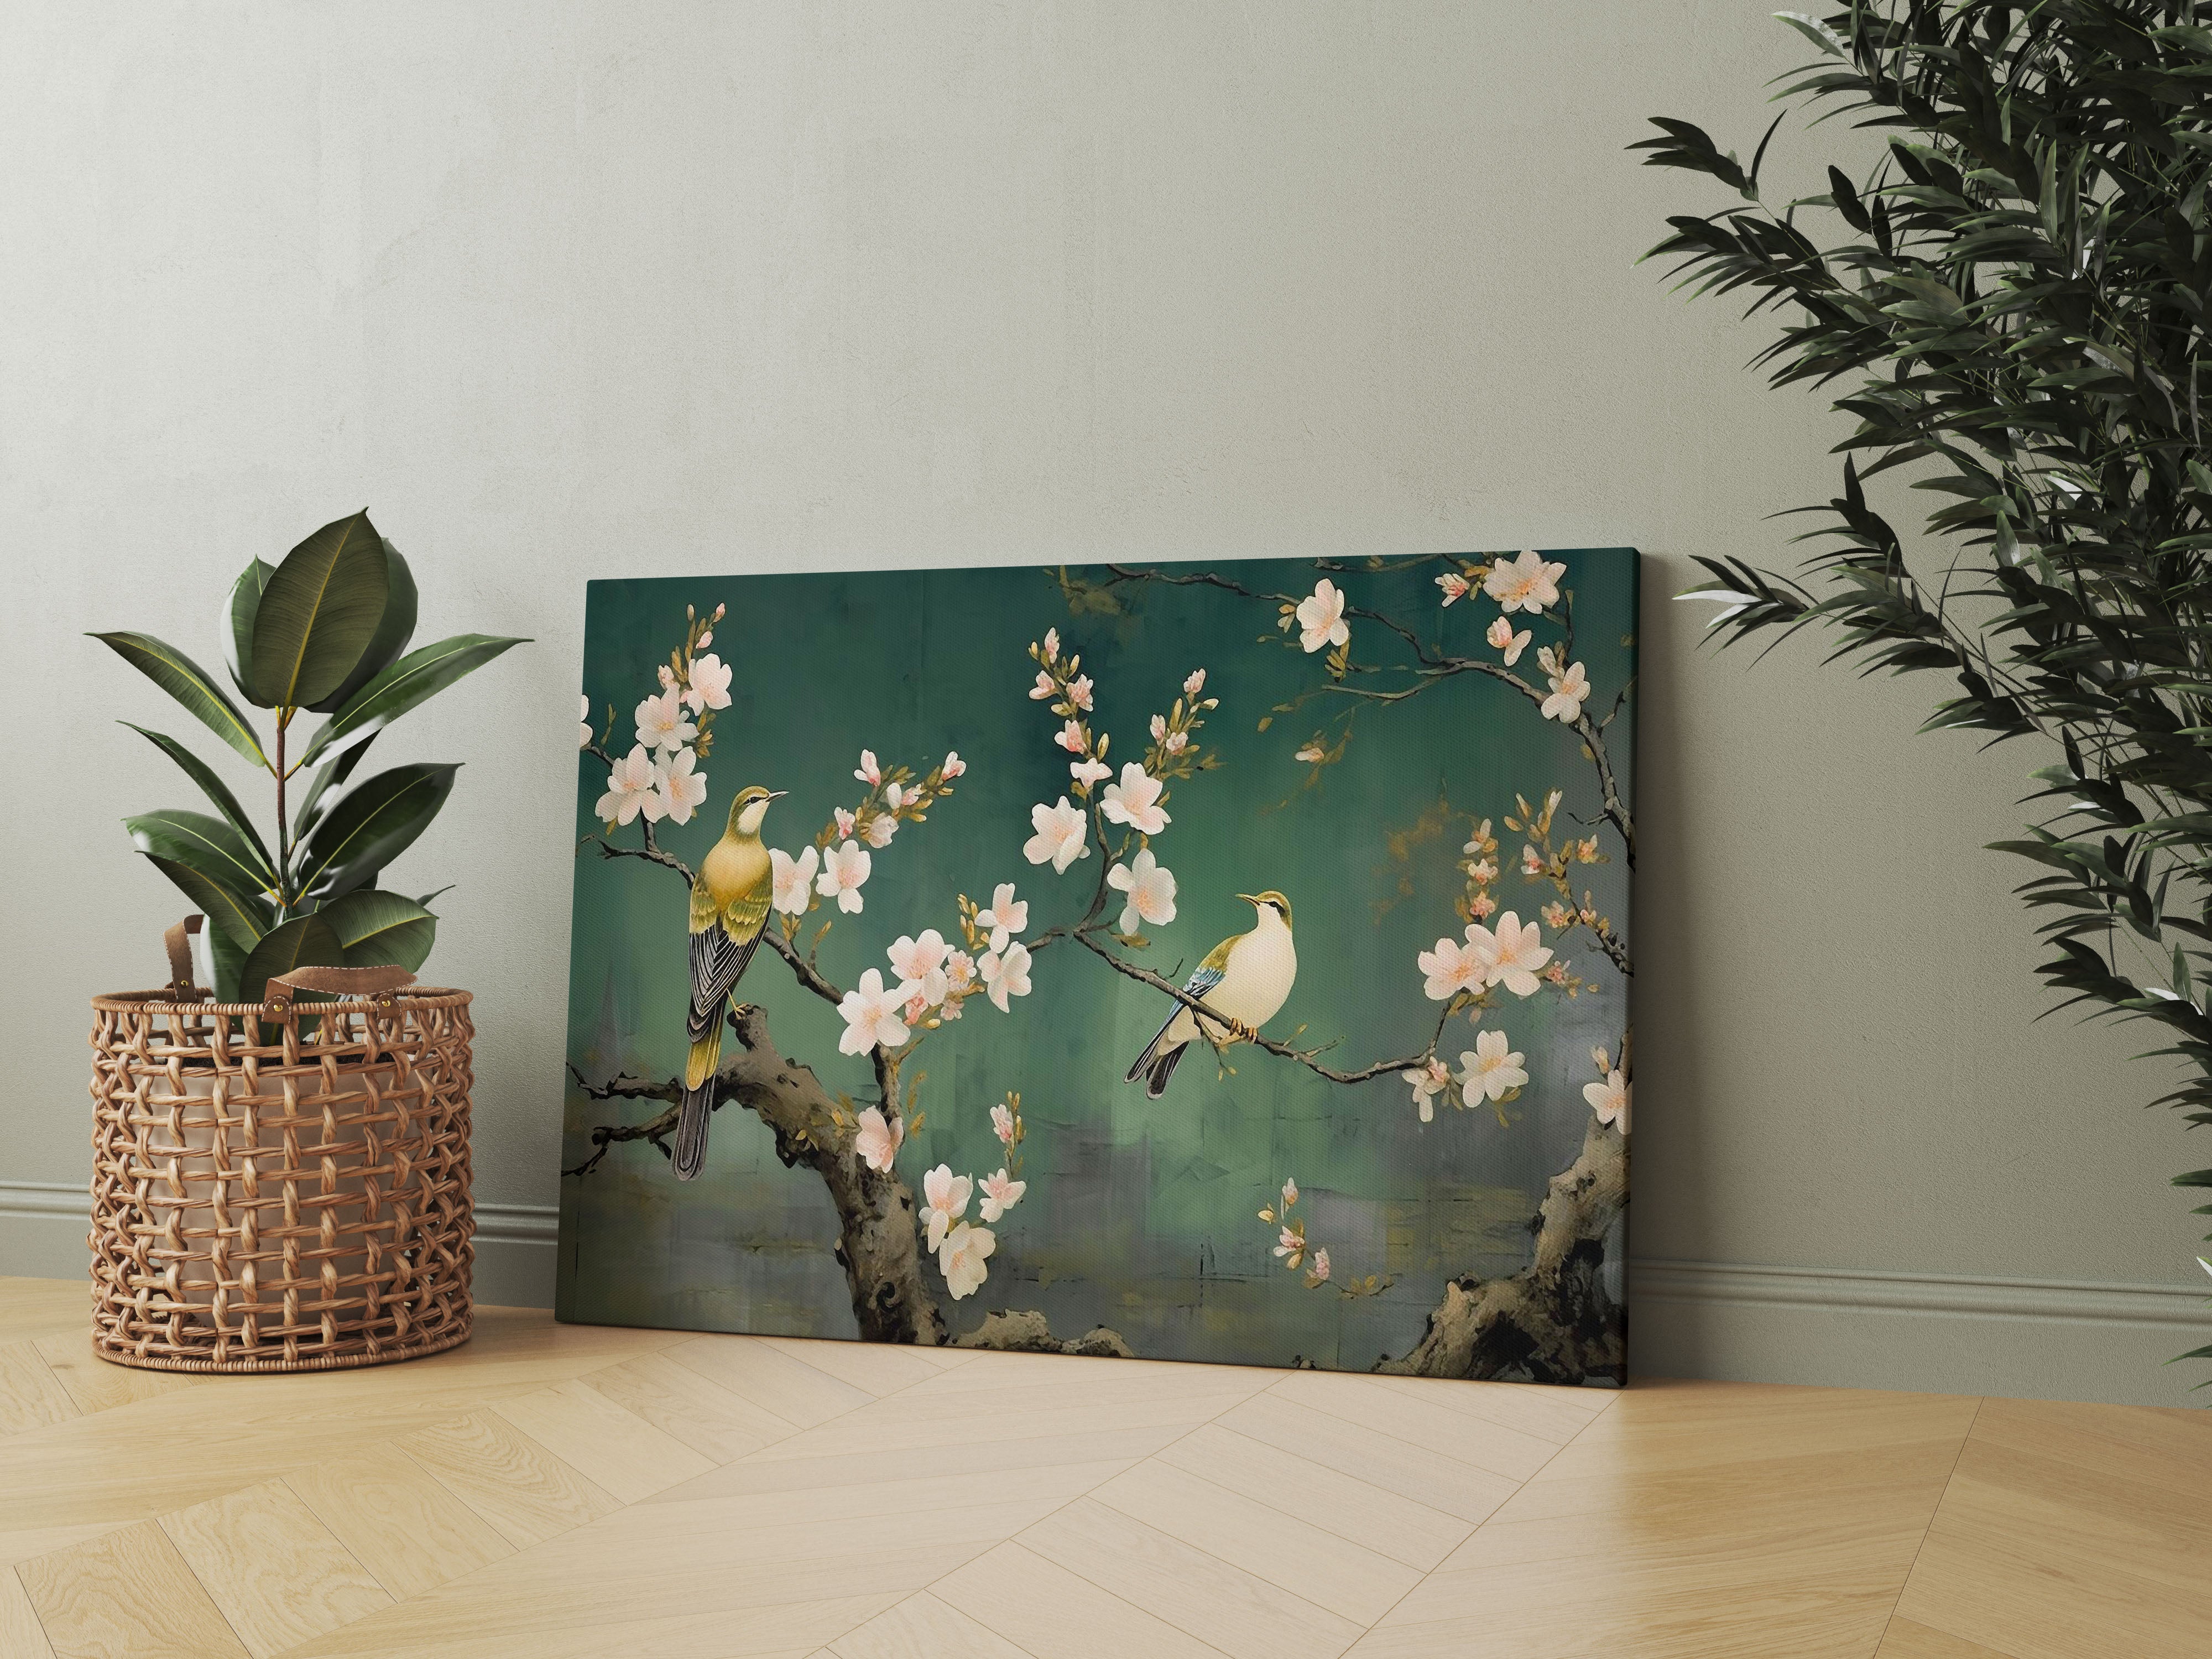 Flower Tree And Birds Canvas Wall Painting